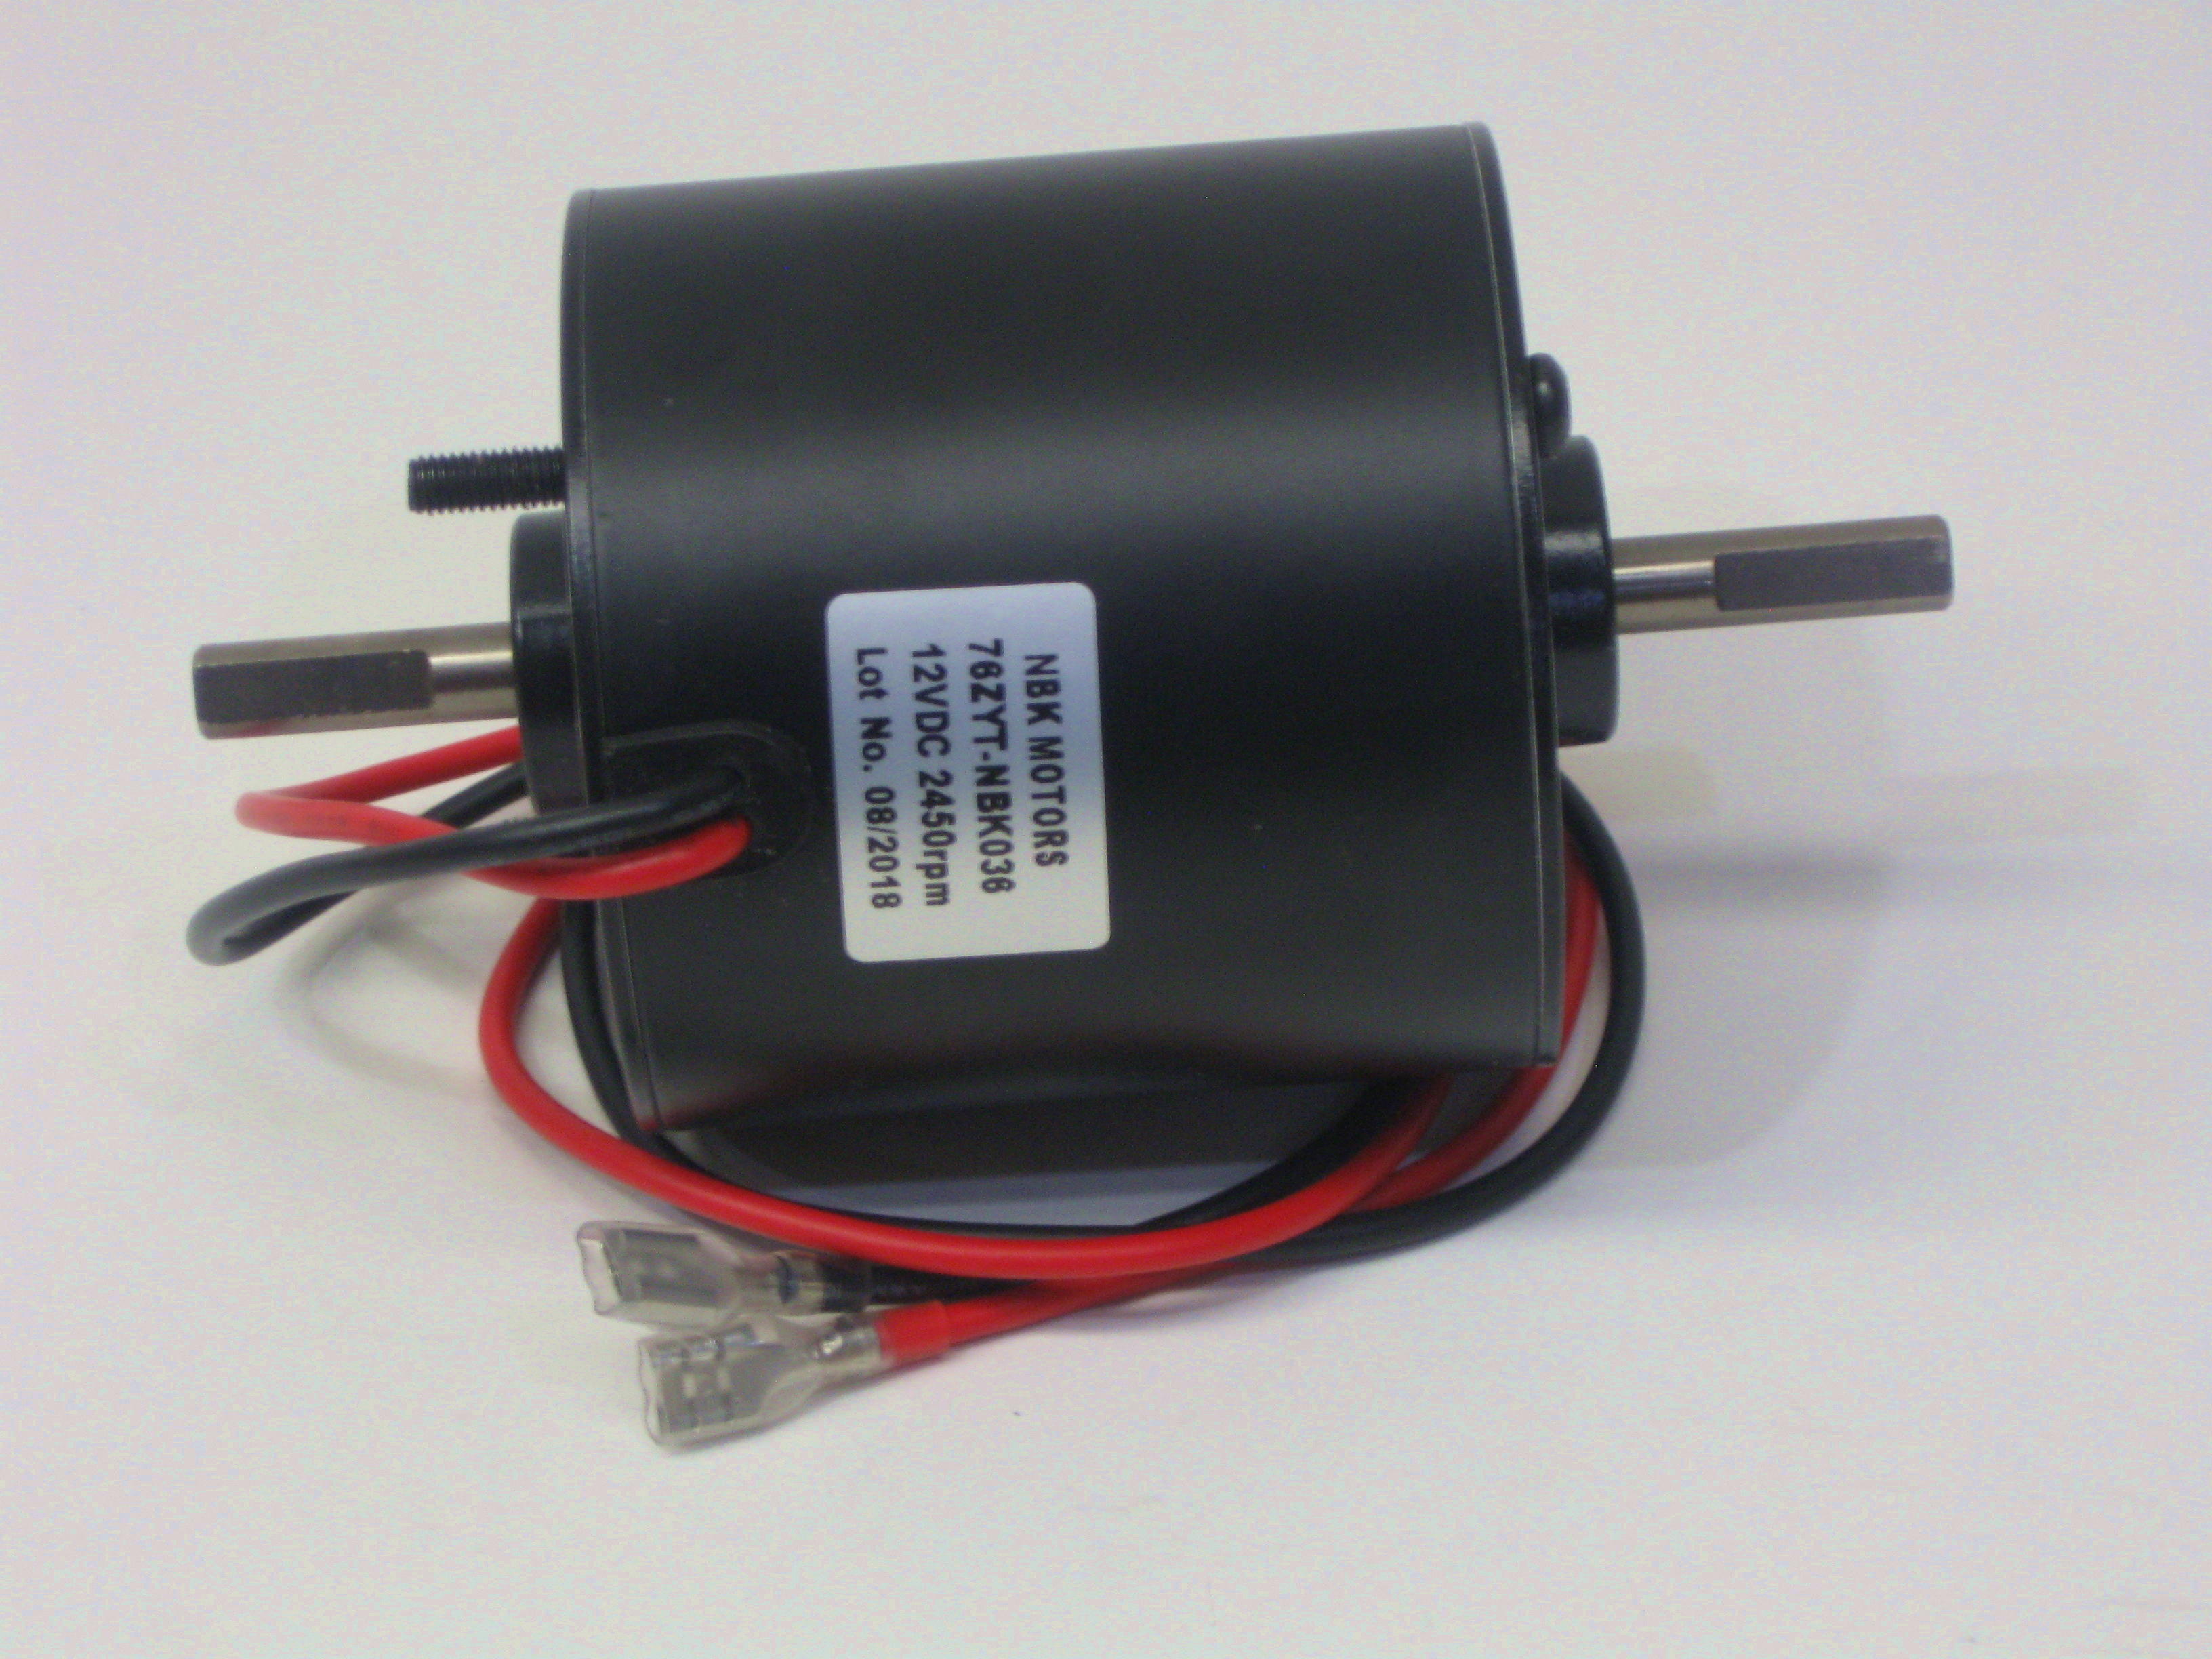 Furnace Motor for Atwood Hydro Flame RV Furnace 31036 eBay